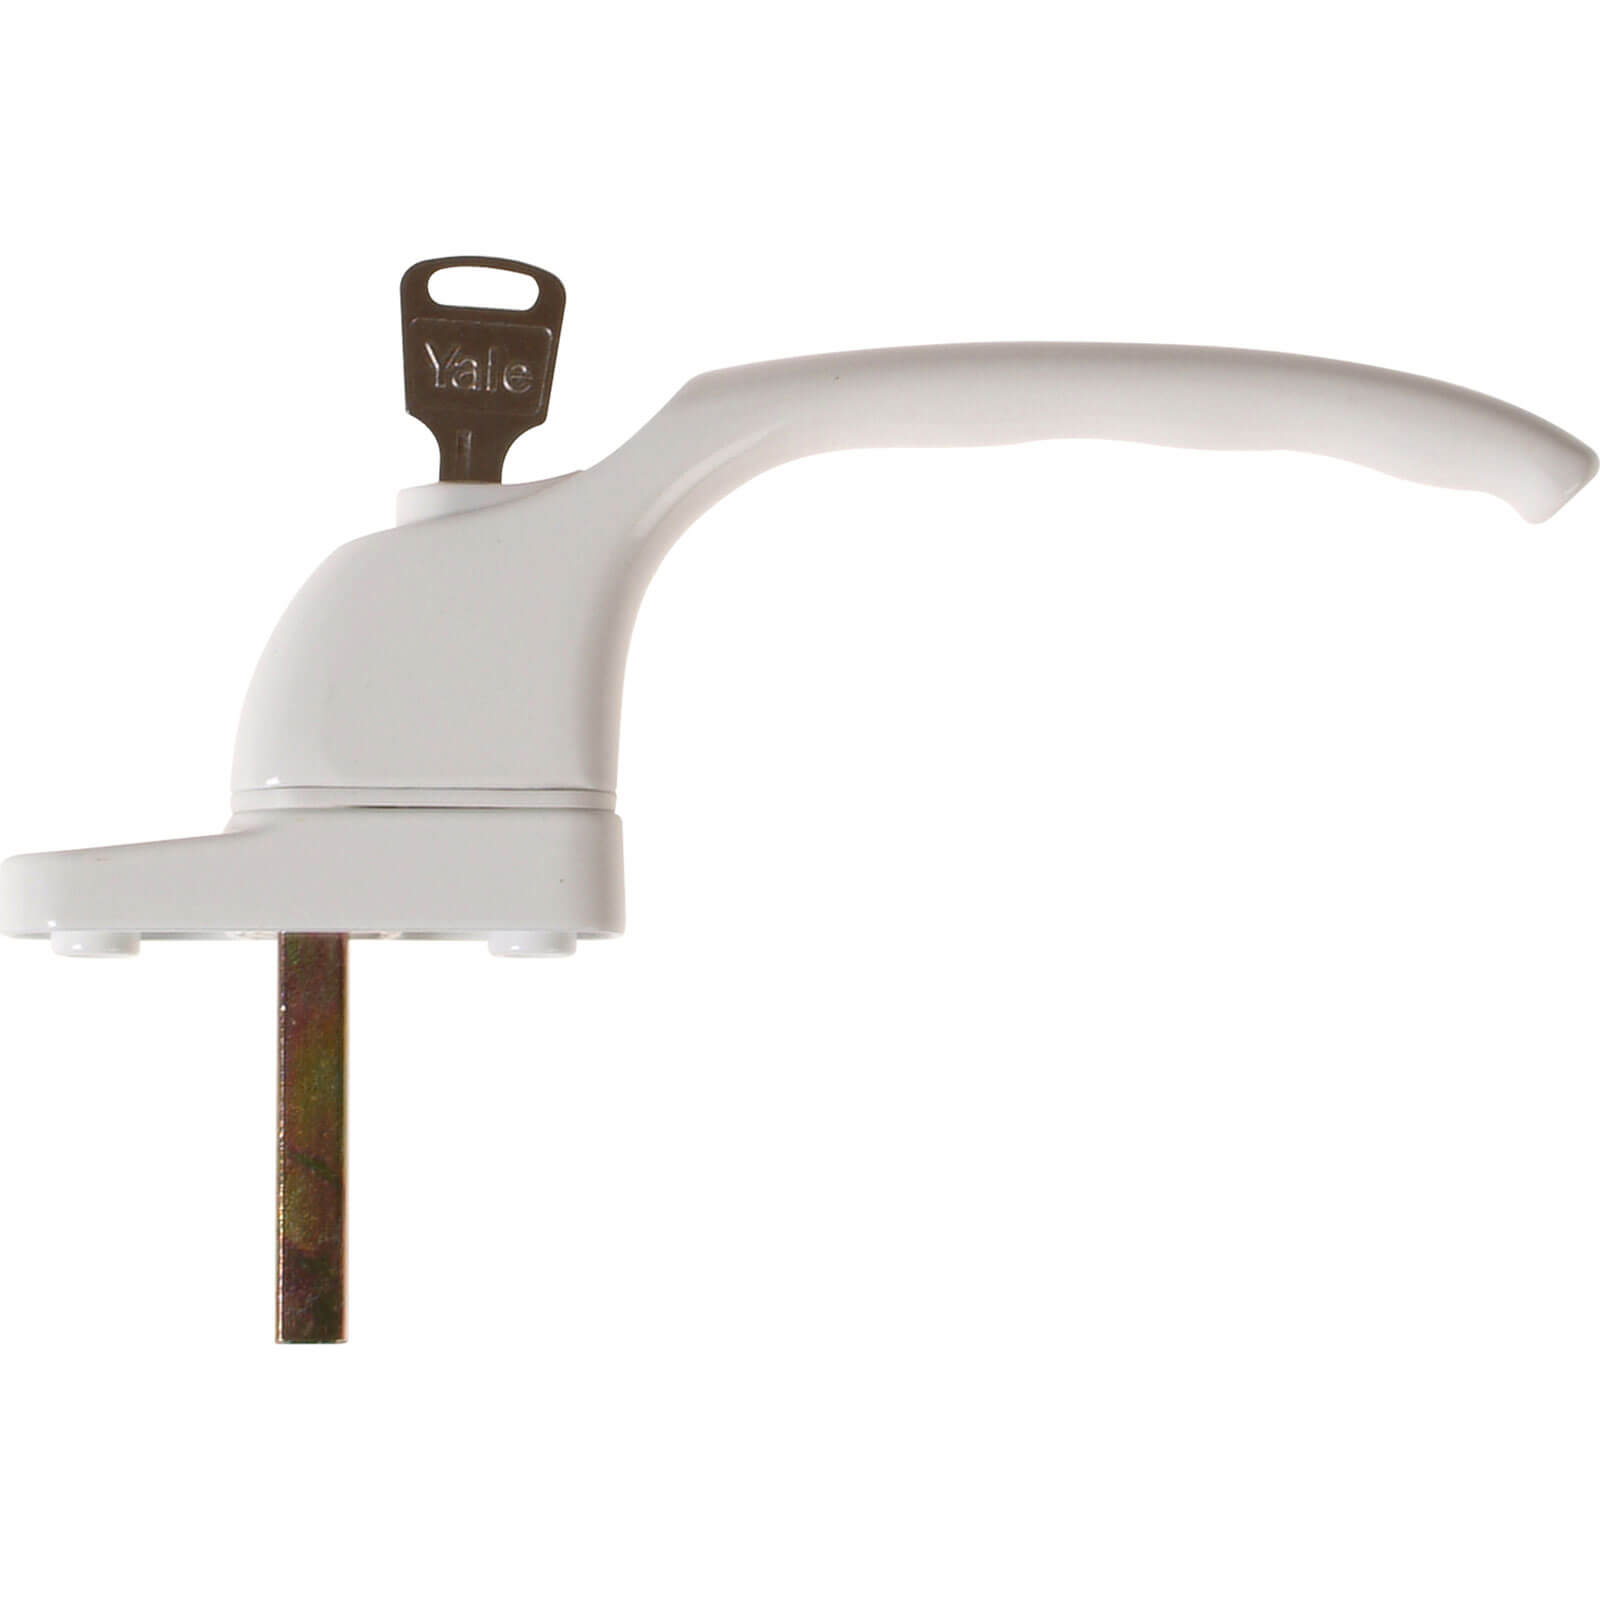 Image of Yale PVCu Window Handle White Pack of 1